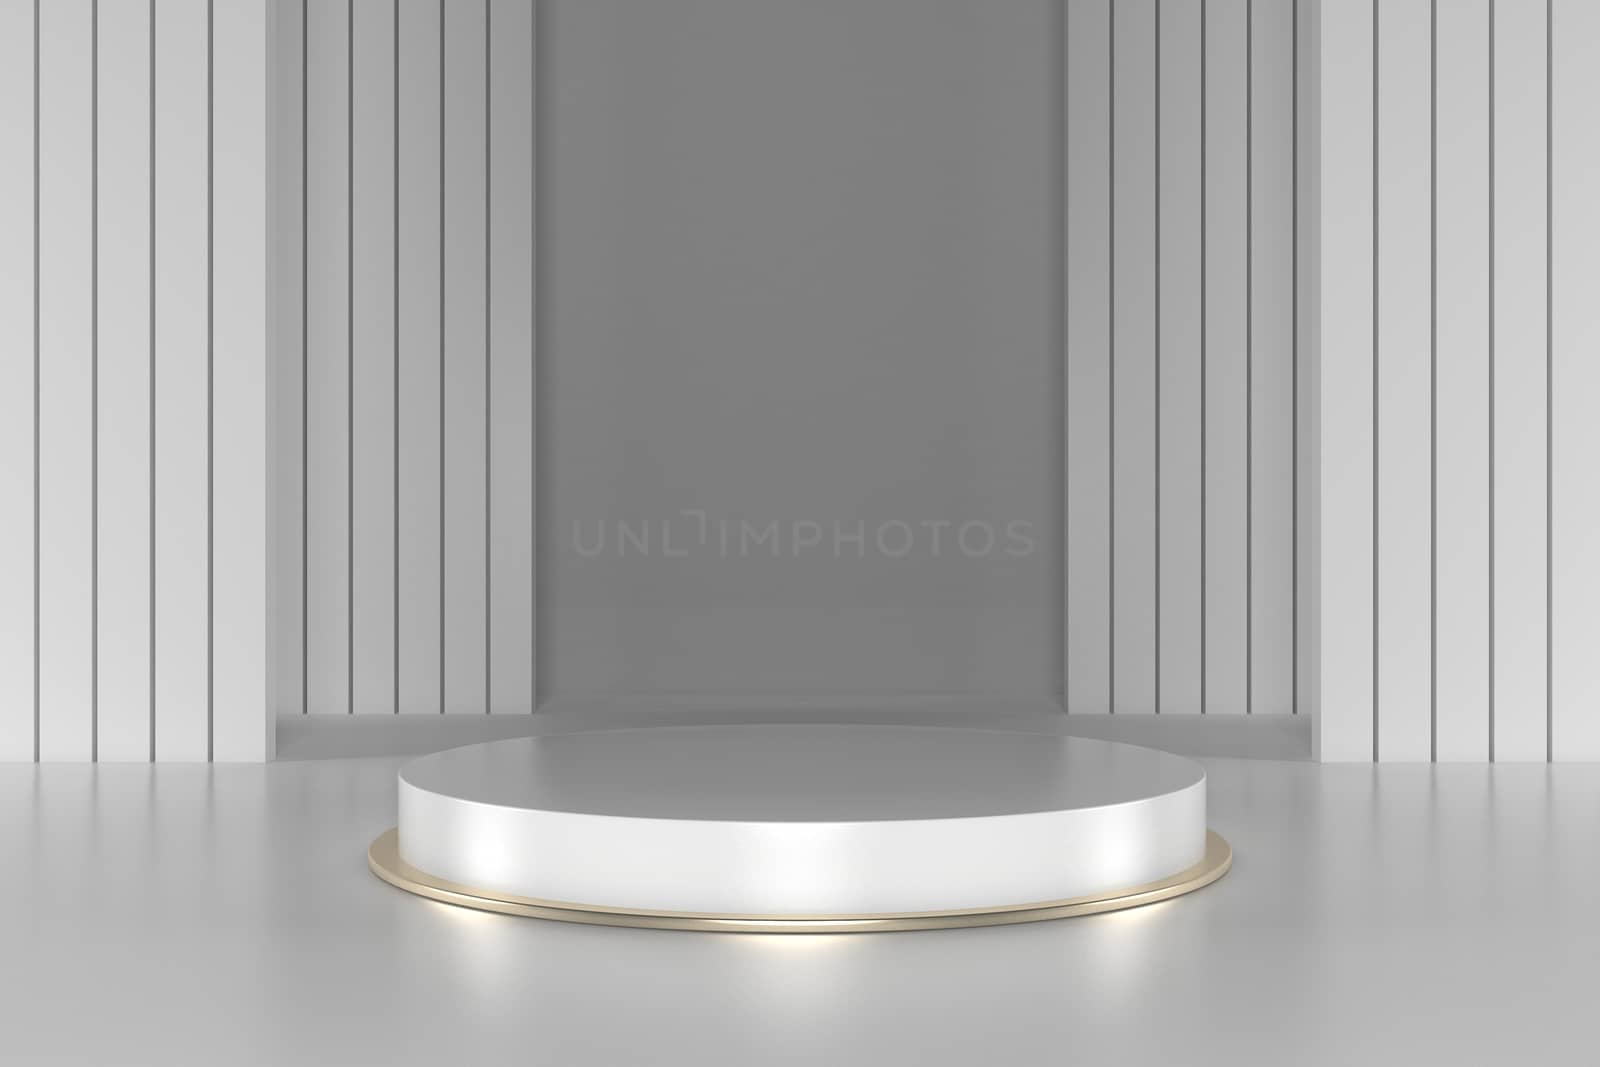 3d render, abstract geometric background, cylinder podium, minimalistic primitive shapes, modern mock up, blank template, empty showcase, shop display